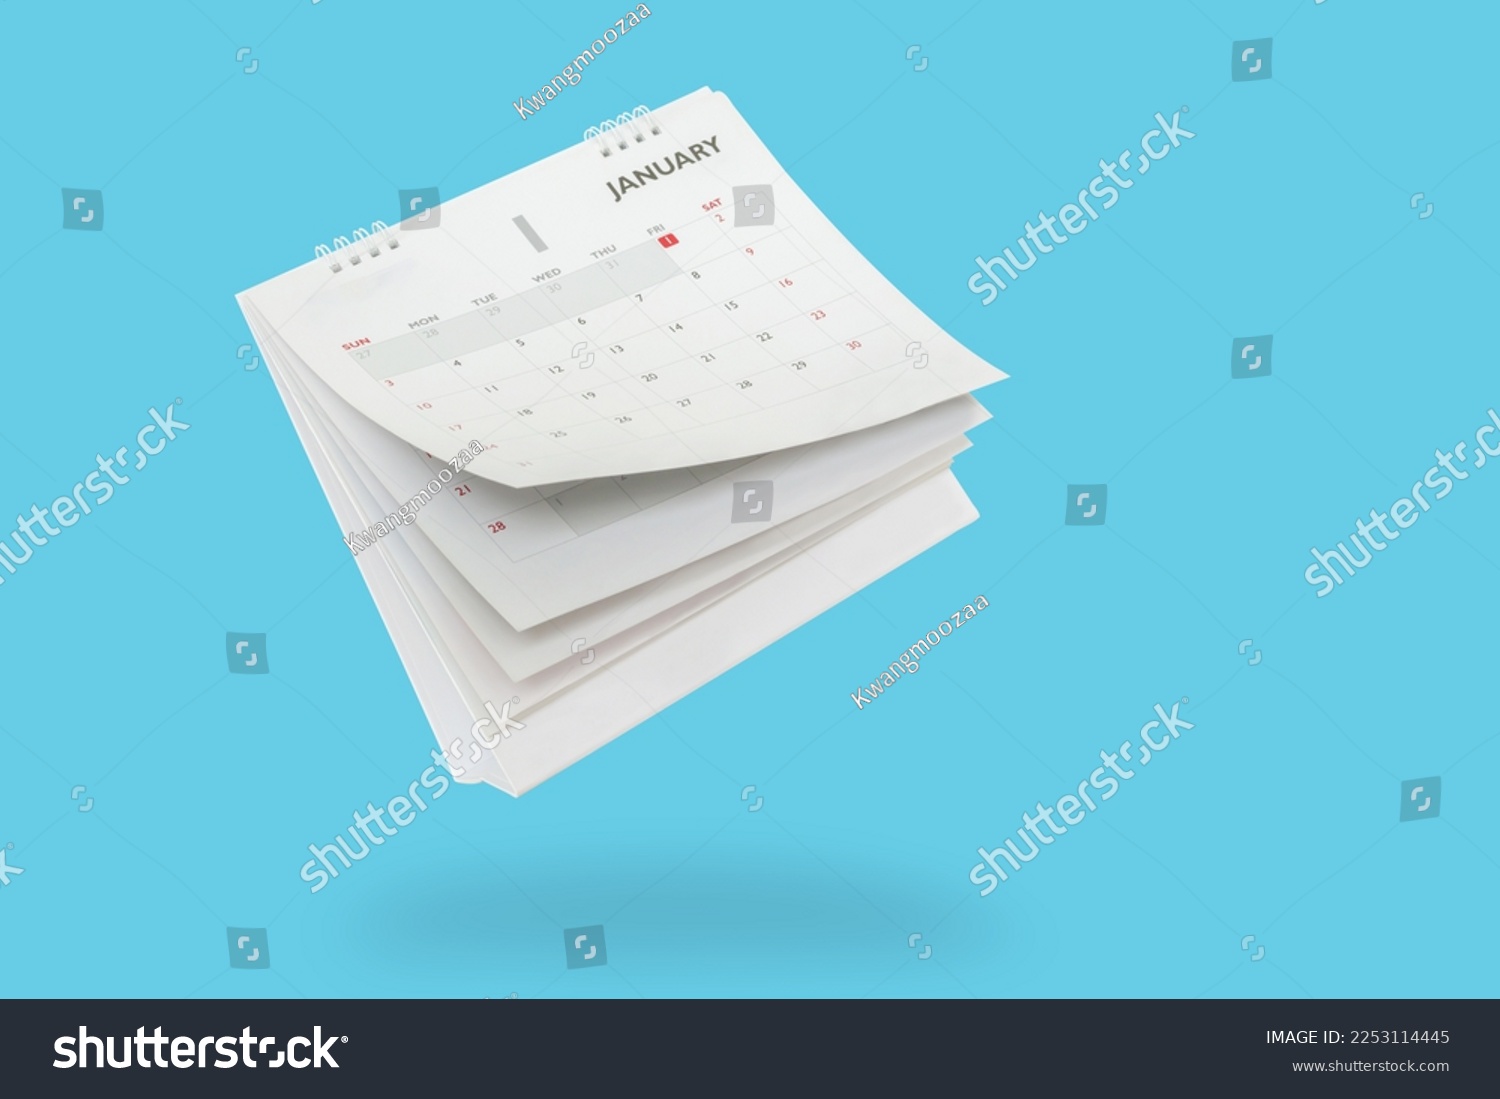 White paper desk calendar flipping page isolated on blue background #2253114445